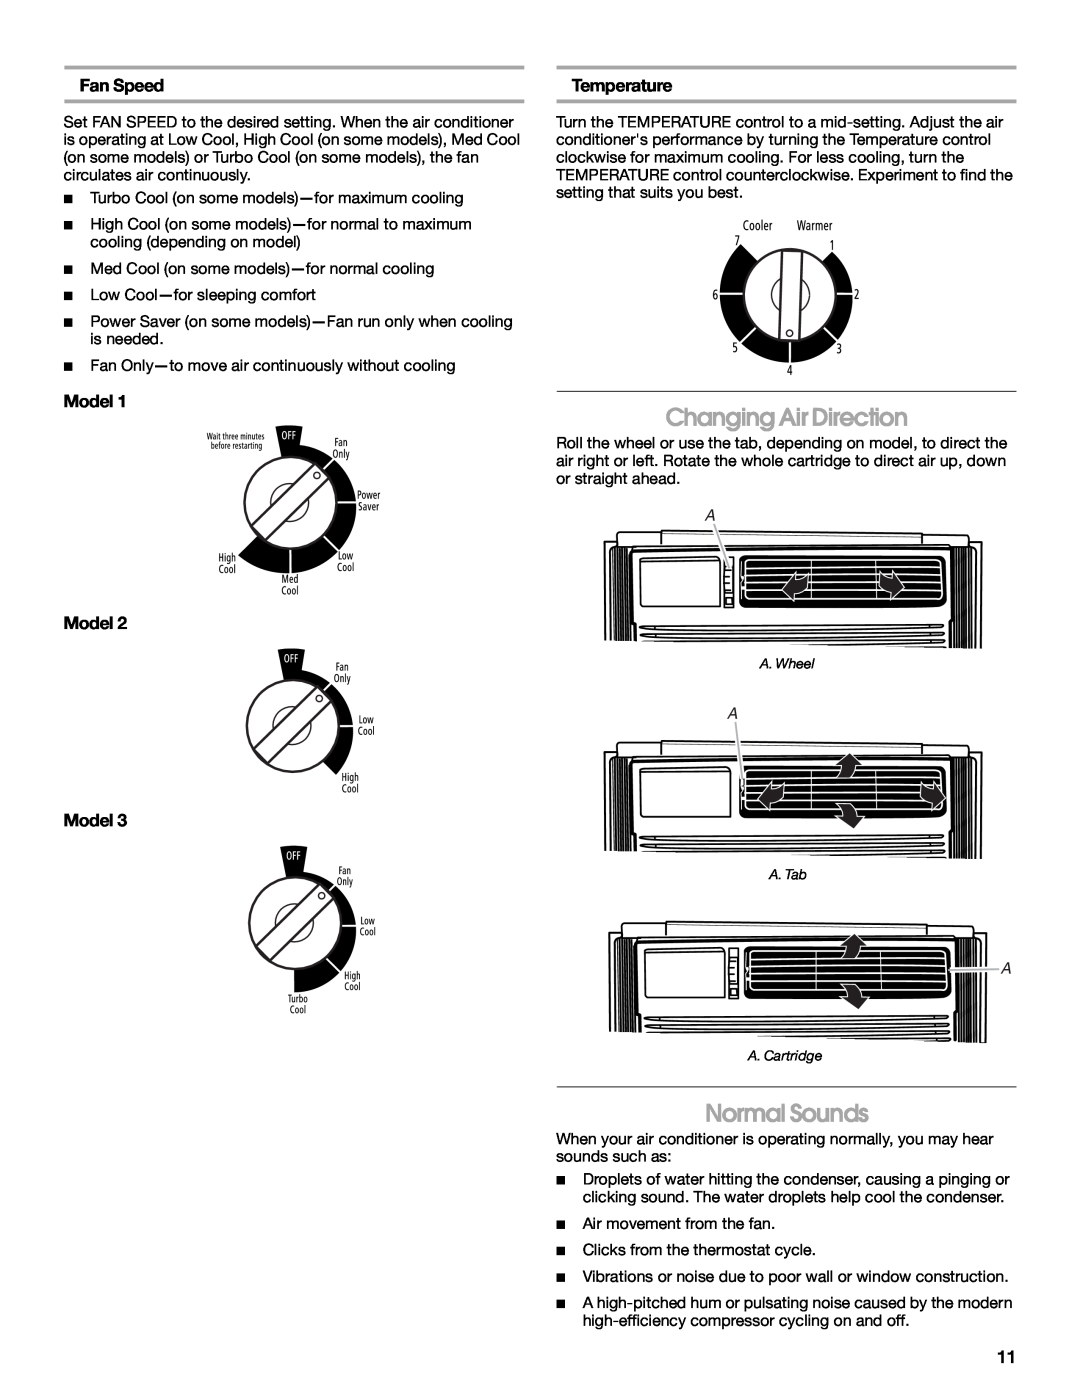 Whirlpool ACM052PS0 manual Changing Air Direction, Normal Sounds, Fan Speed, Model Model Model, Temperature 